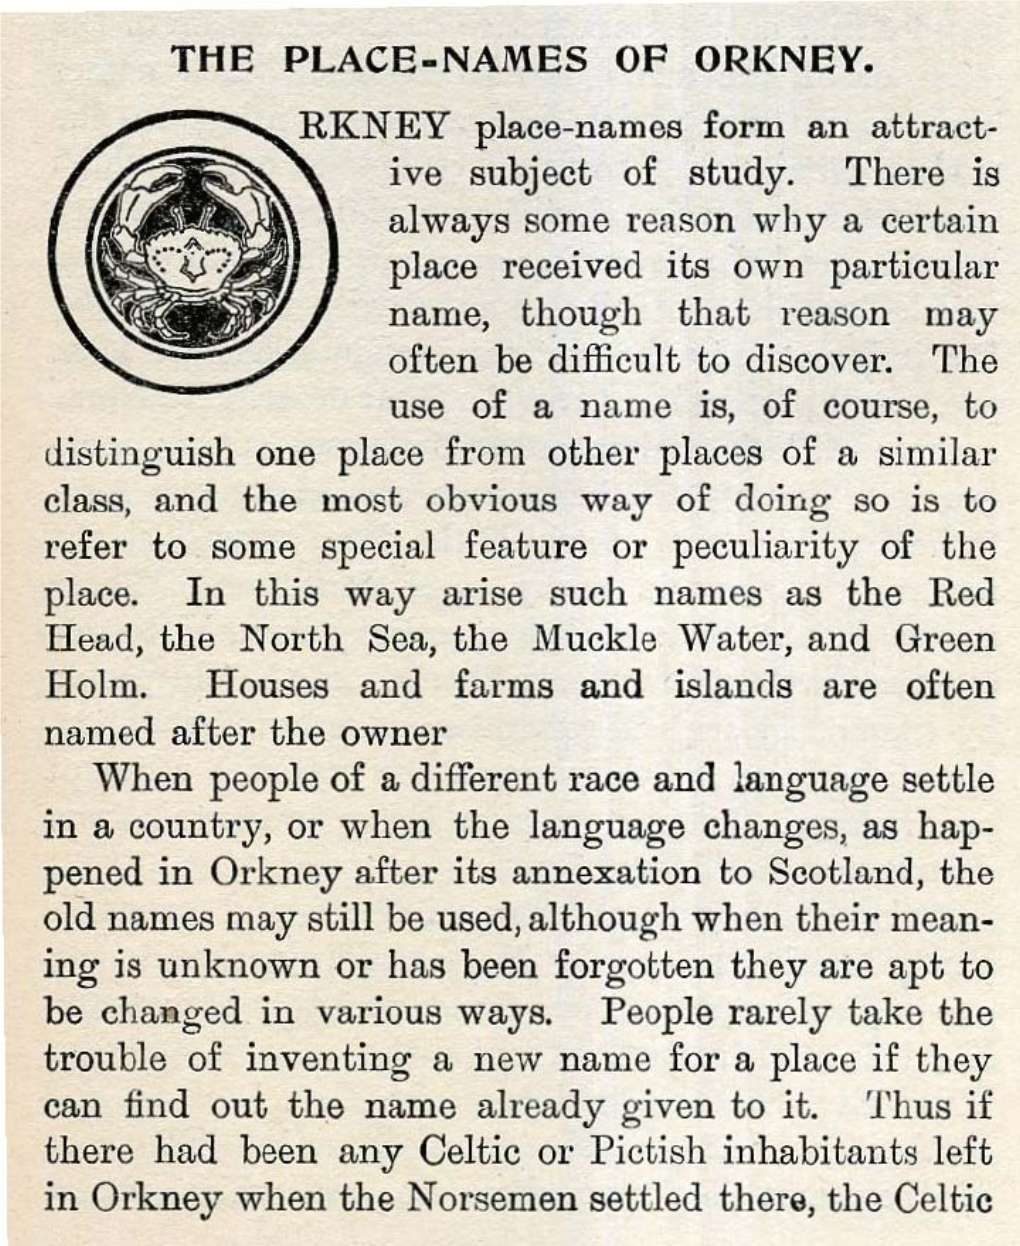 The Place-Names of Orkney